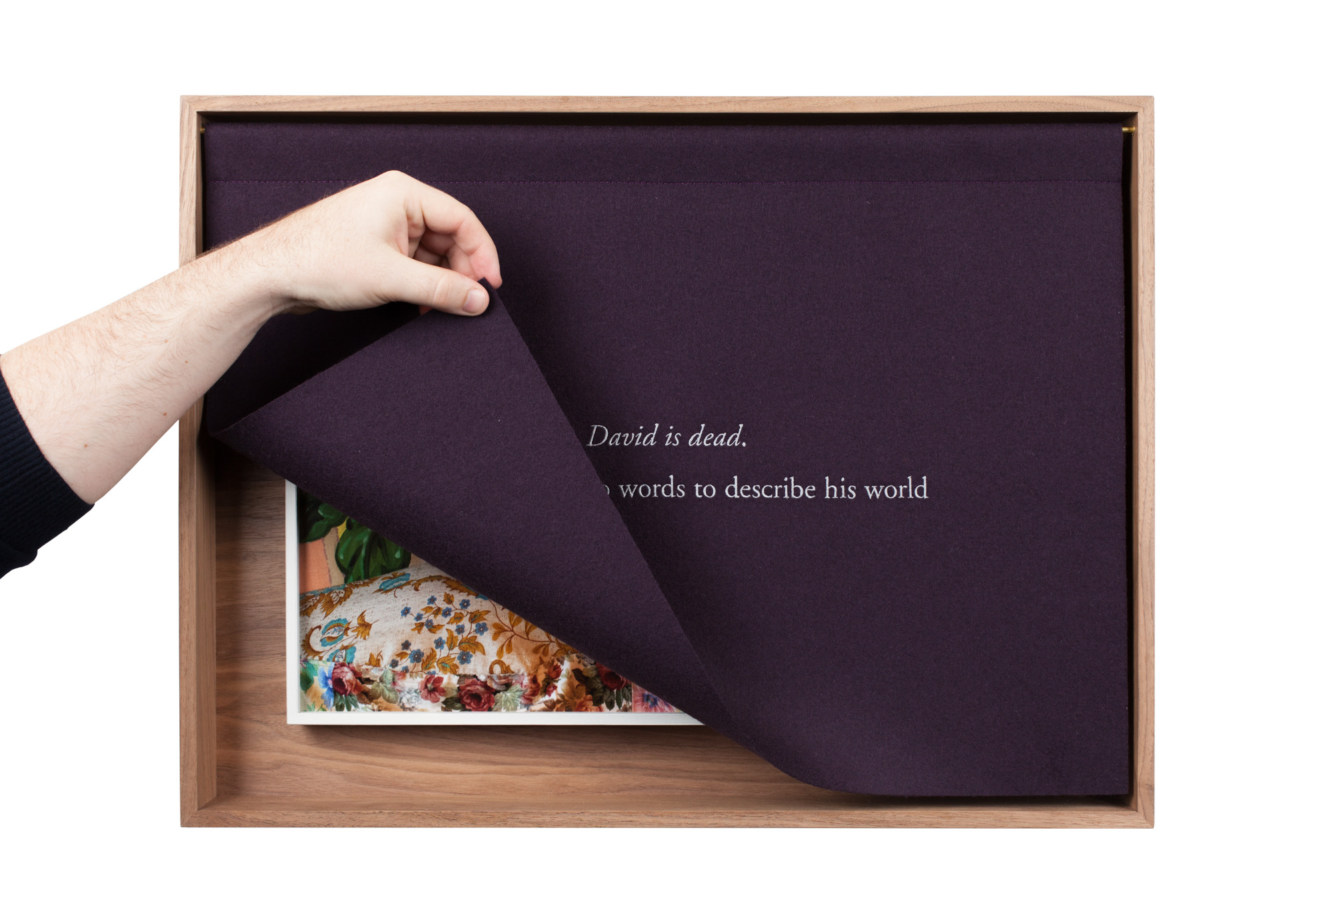 A wooden box with a purple curtain, embroidered with white text, the curtain lifted by a hand